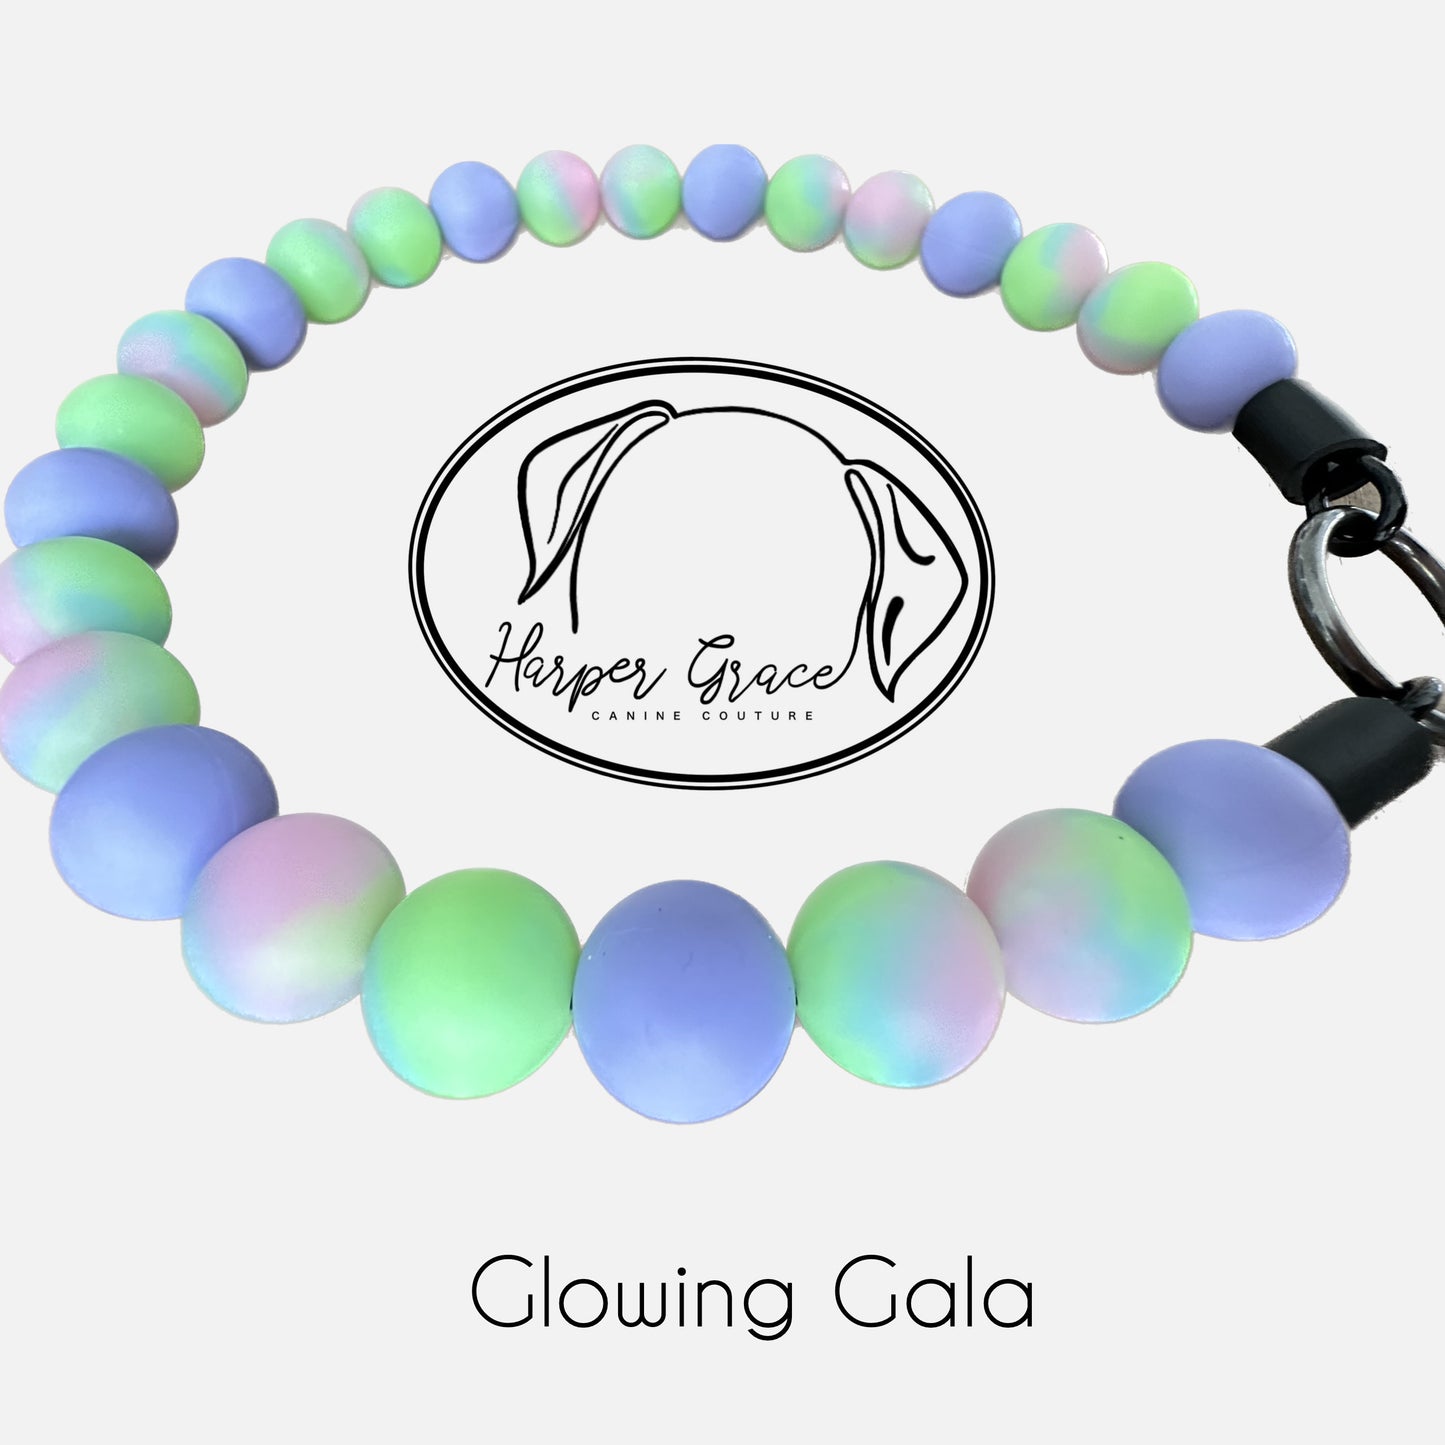 Glowing Gala Silicone Beaded Dog Collar, Petite, SM/MED Dog, Cats